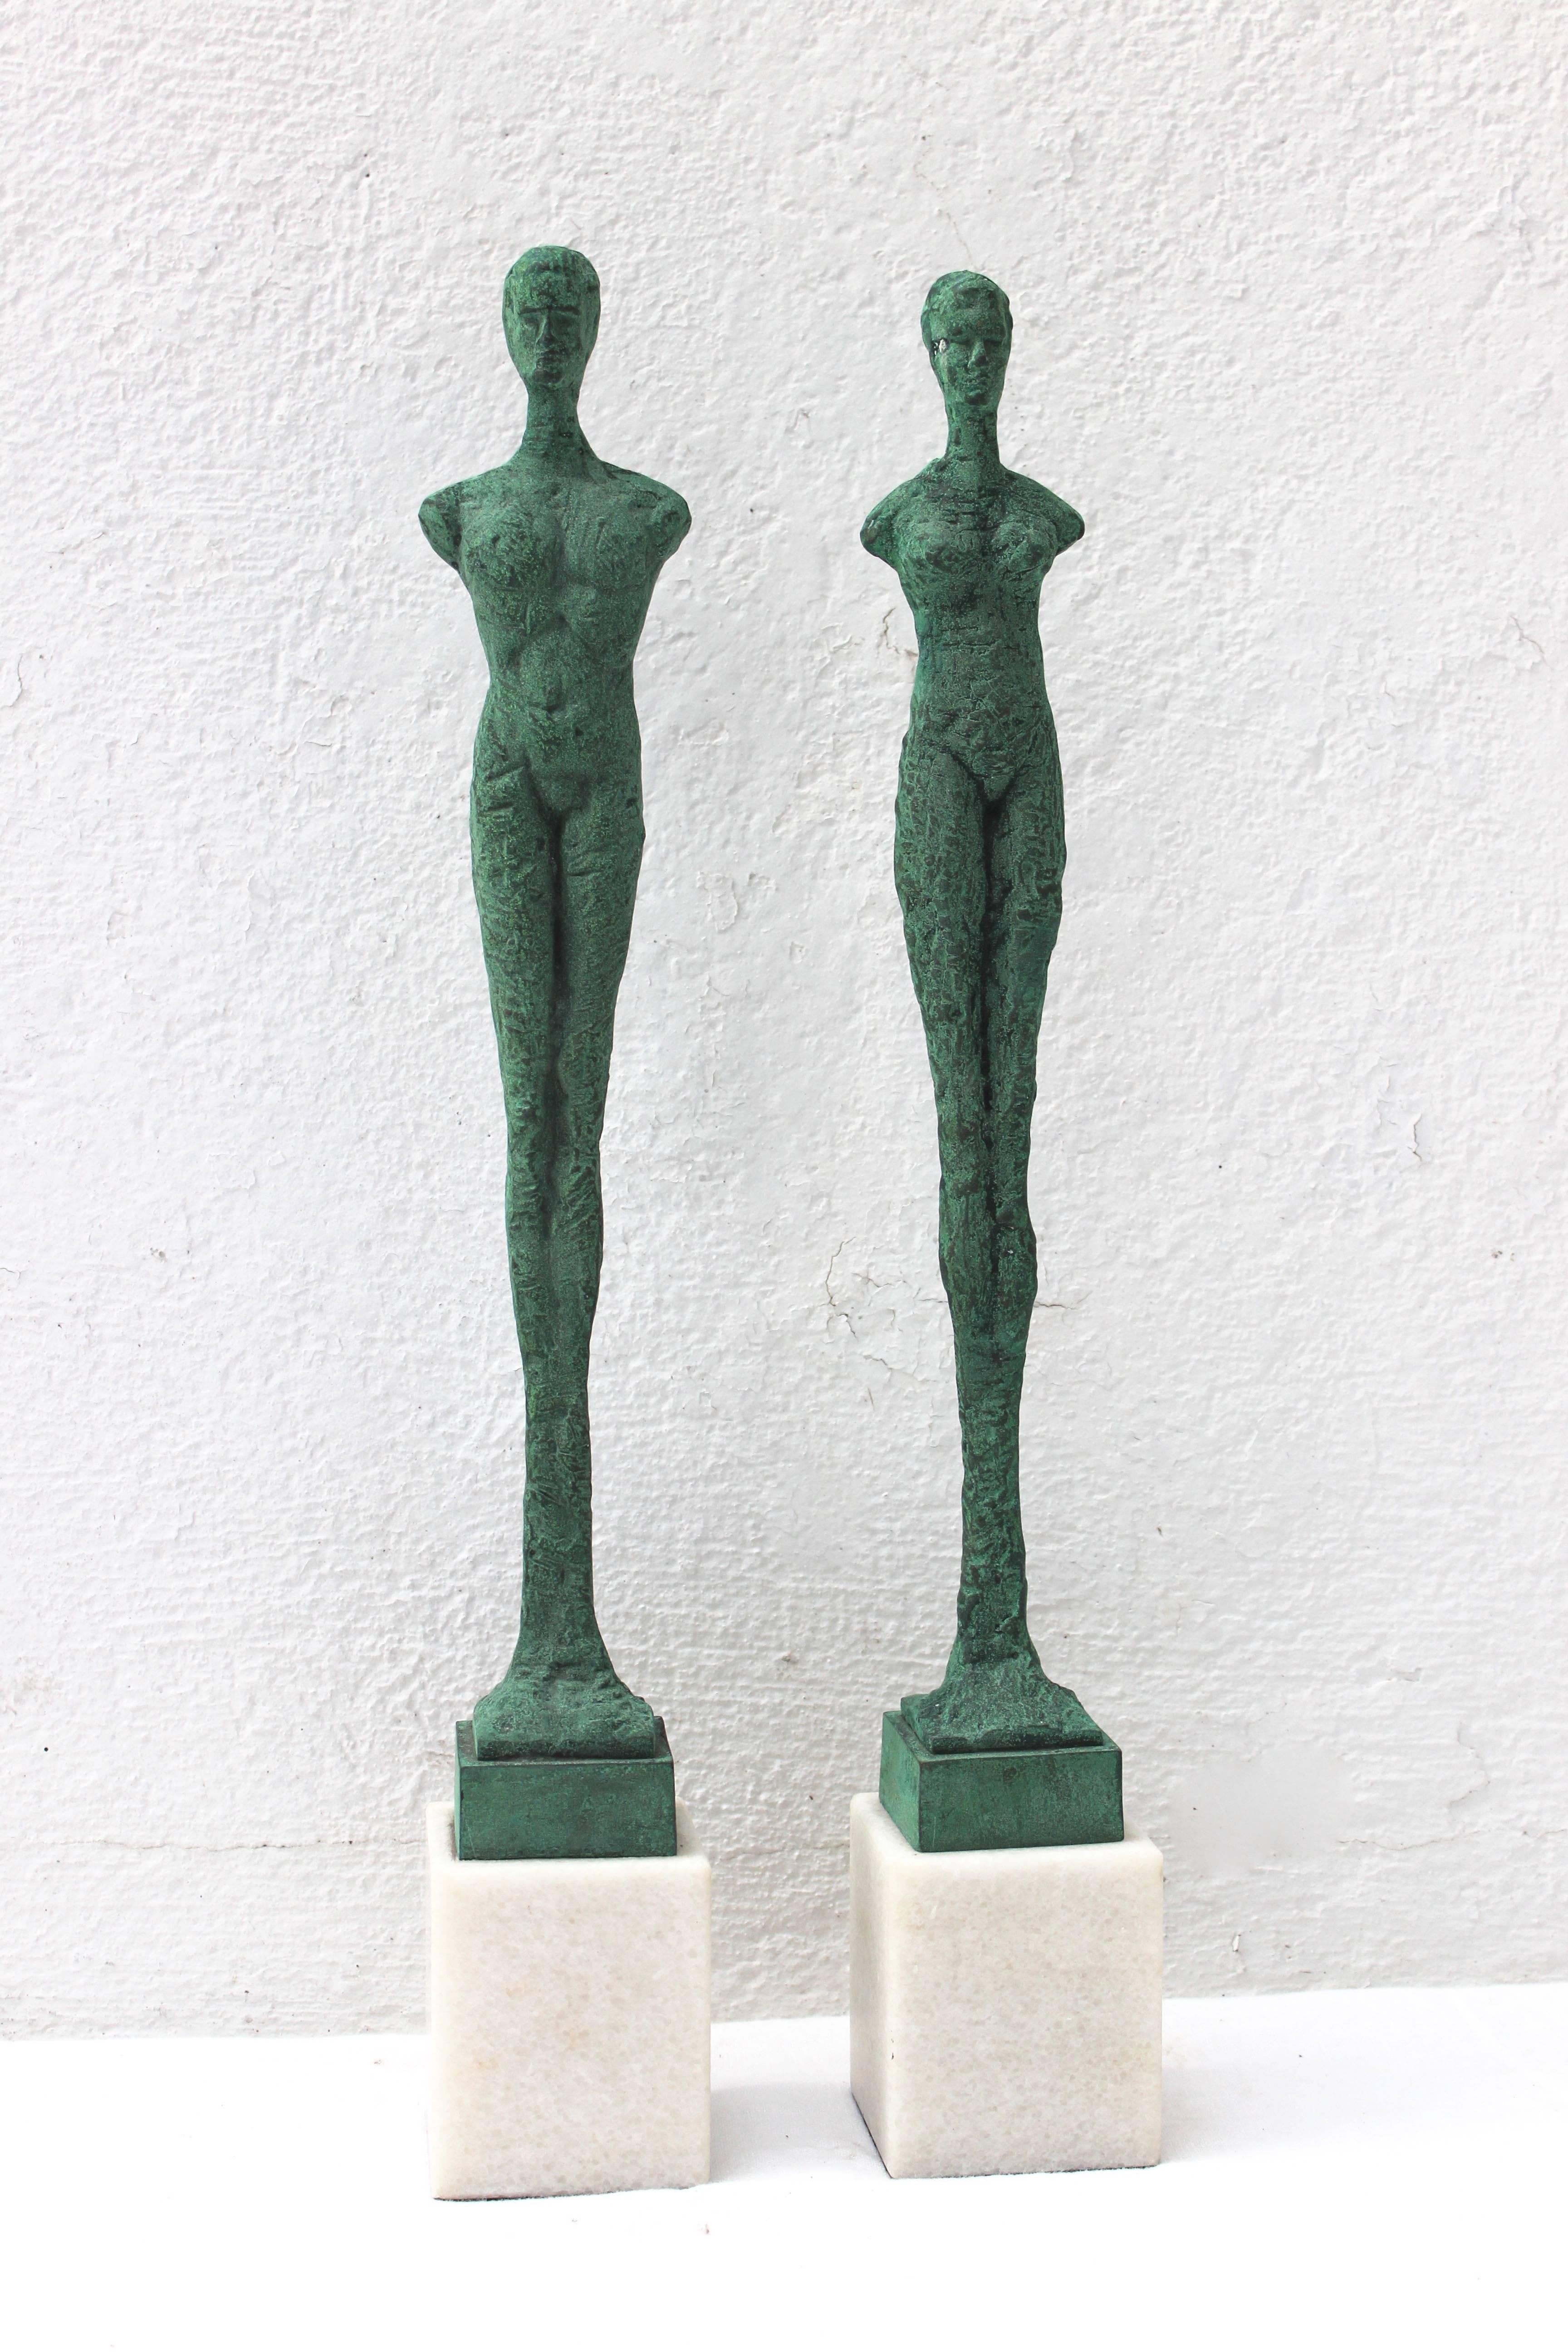 Wonderful pair of patinated bronze Giacometti style figures mounted on marble block plinths.

Male figure measures 20.75